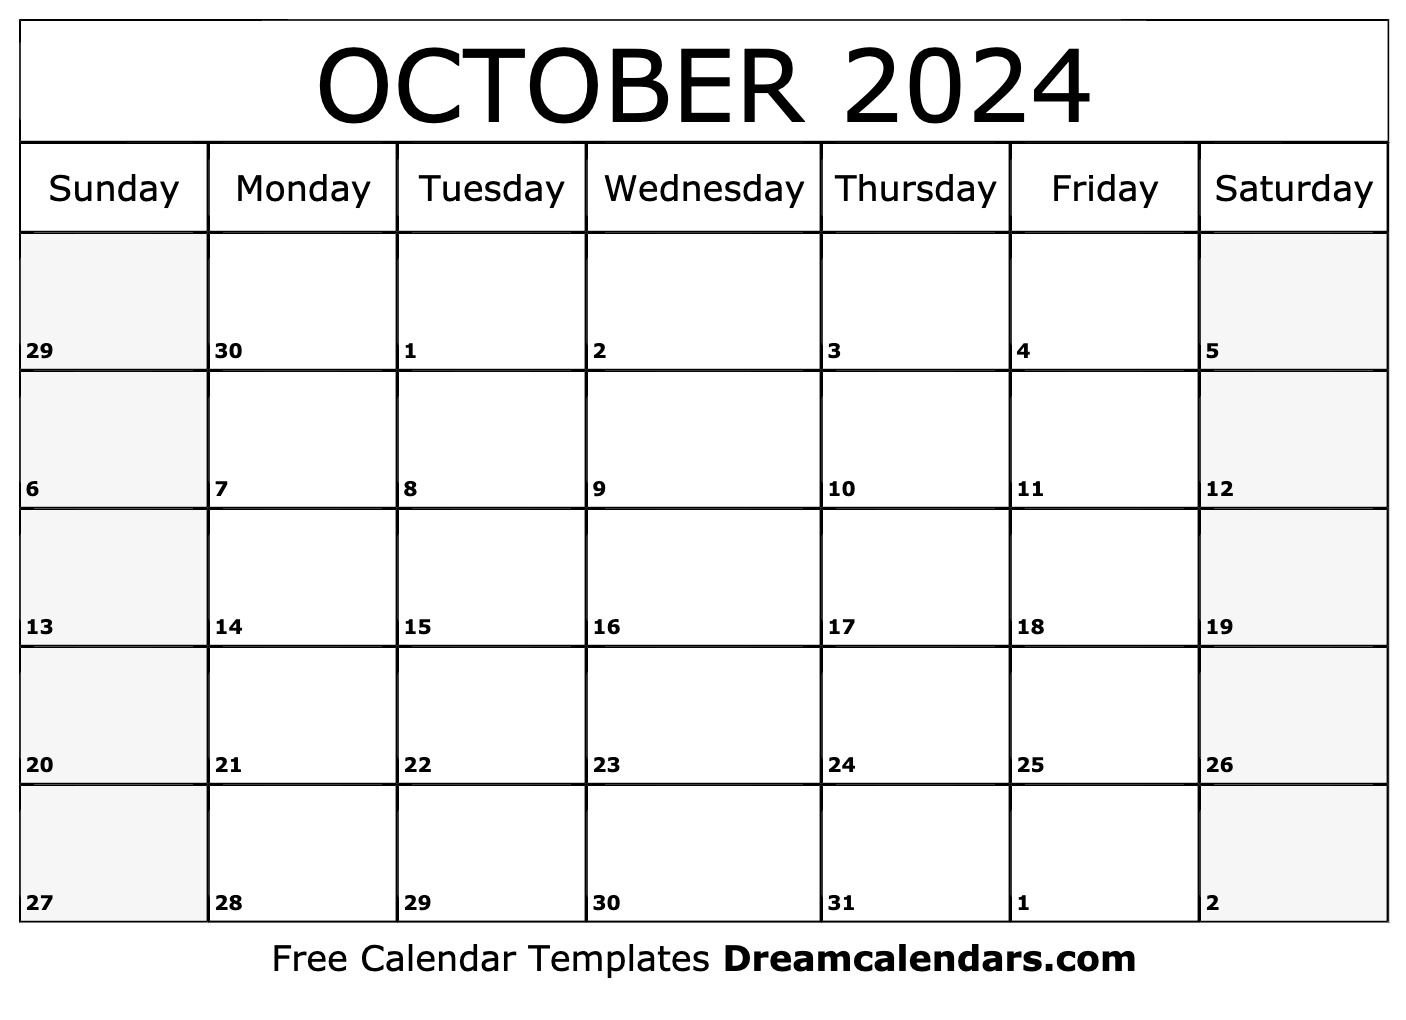 October 2024 Calendar | Free Blank Printable With Holidays for October 2024 Printable Calendar